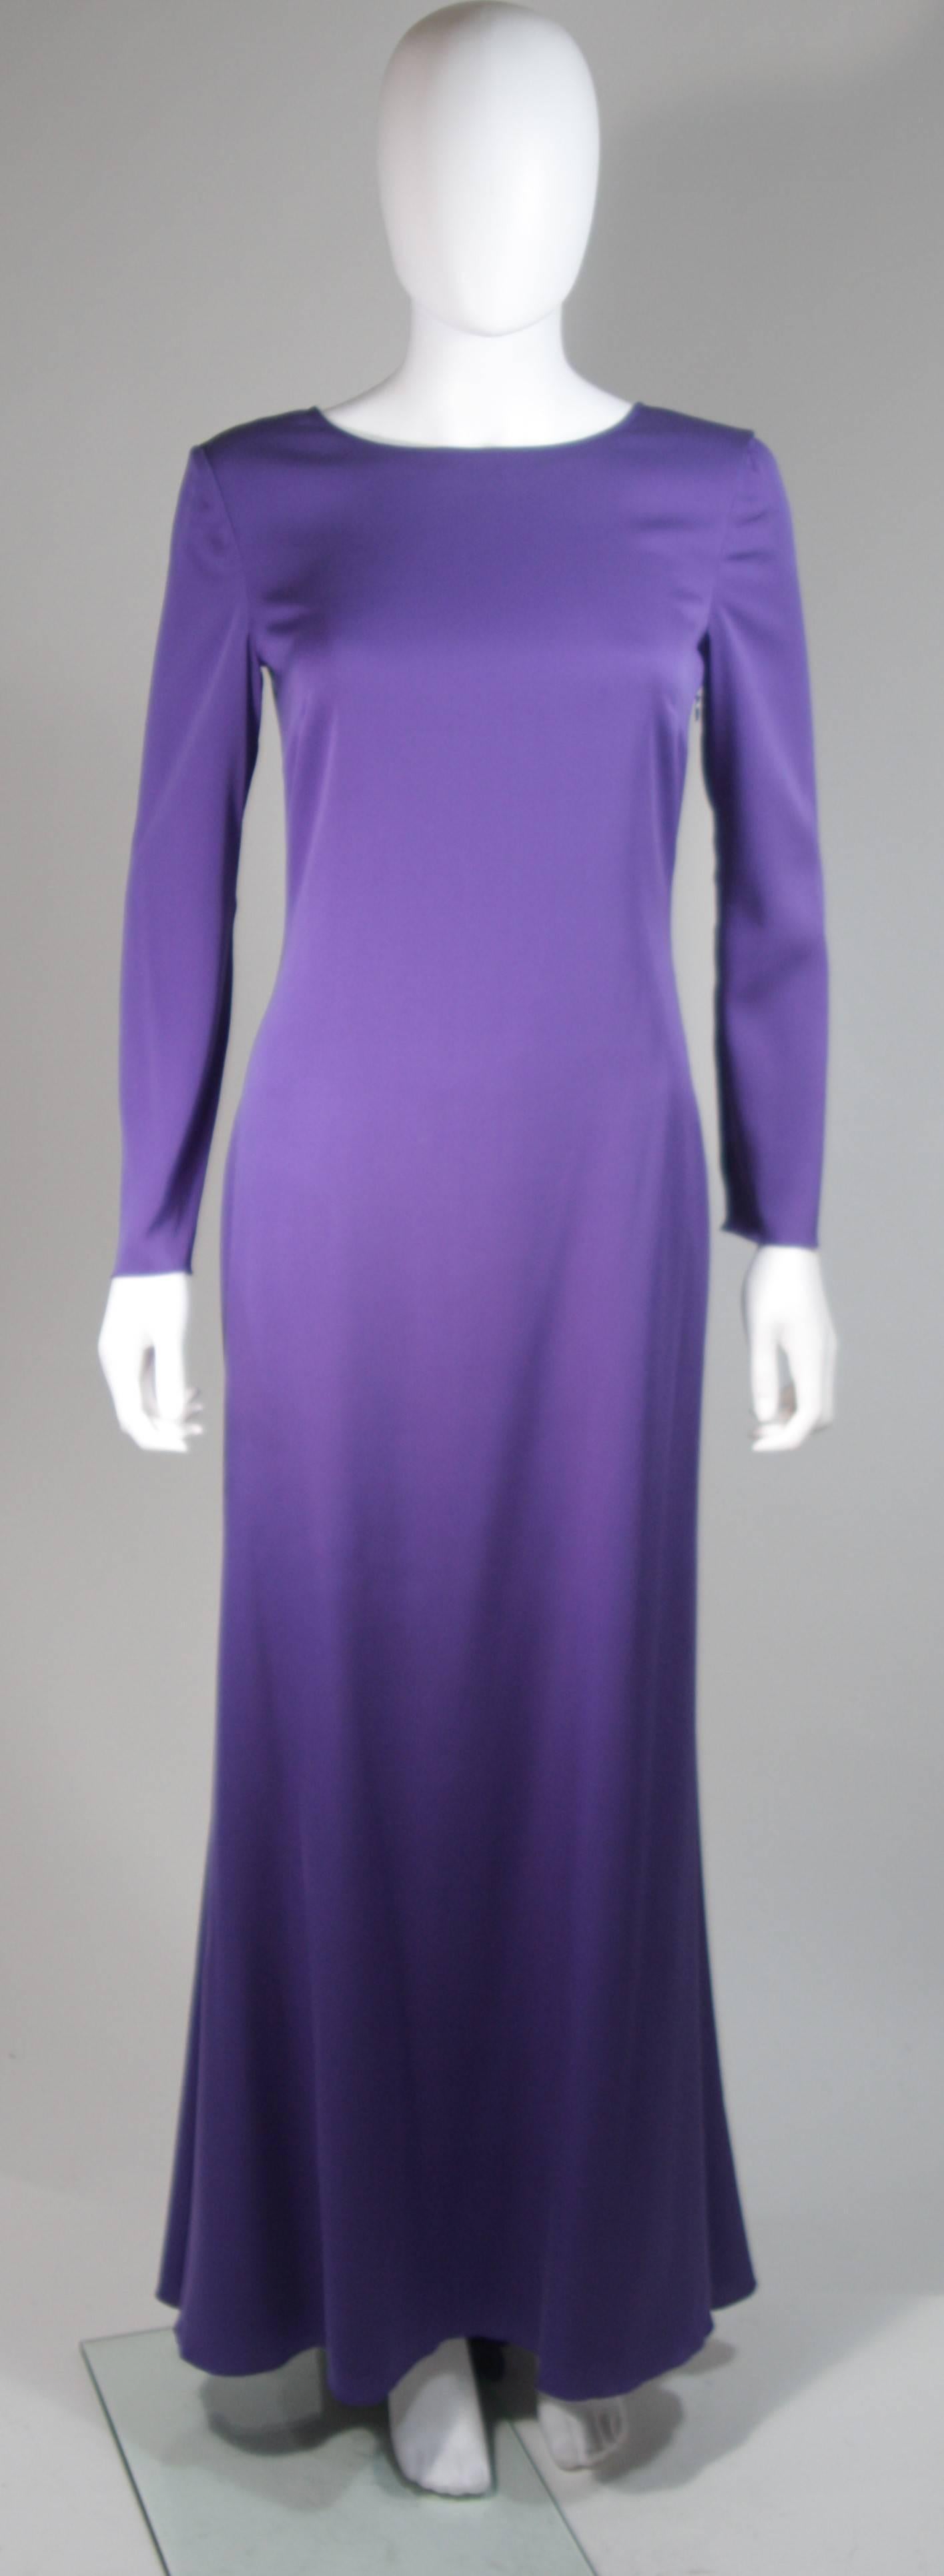 This Emilio Pucci gown is composed of a radiant soft purple silk. The classic long sleeve style is modernized with an exquisite open back. There is a side zipper closure and center back top button. In excellent condition. 

  **Please